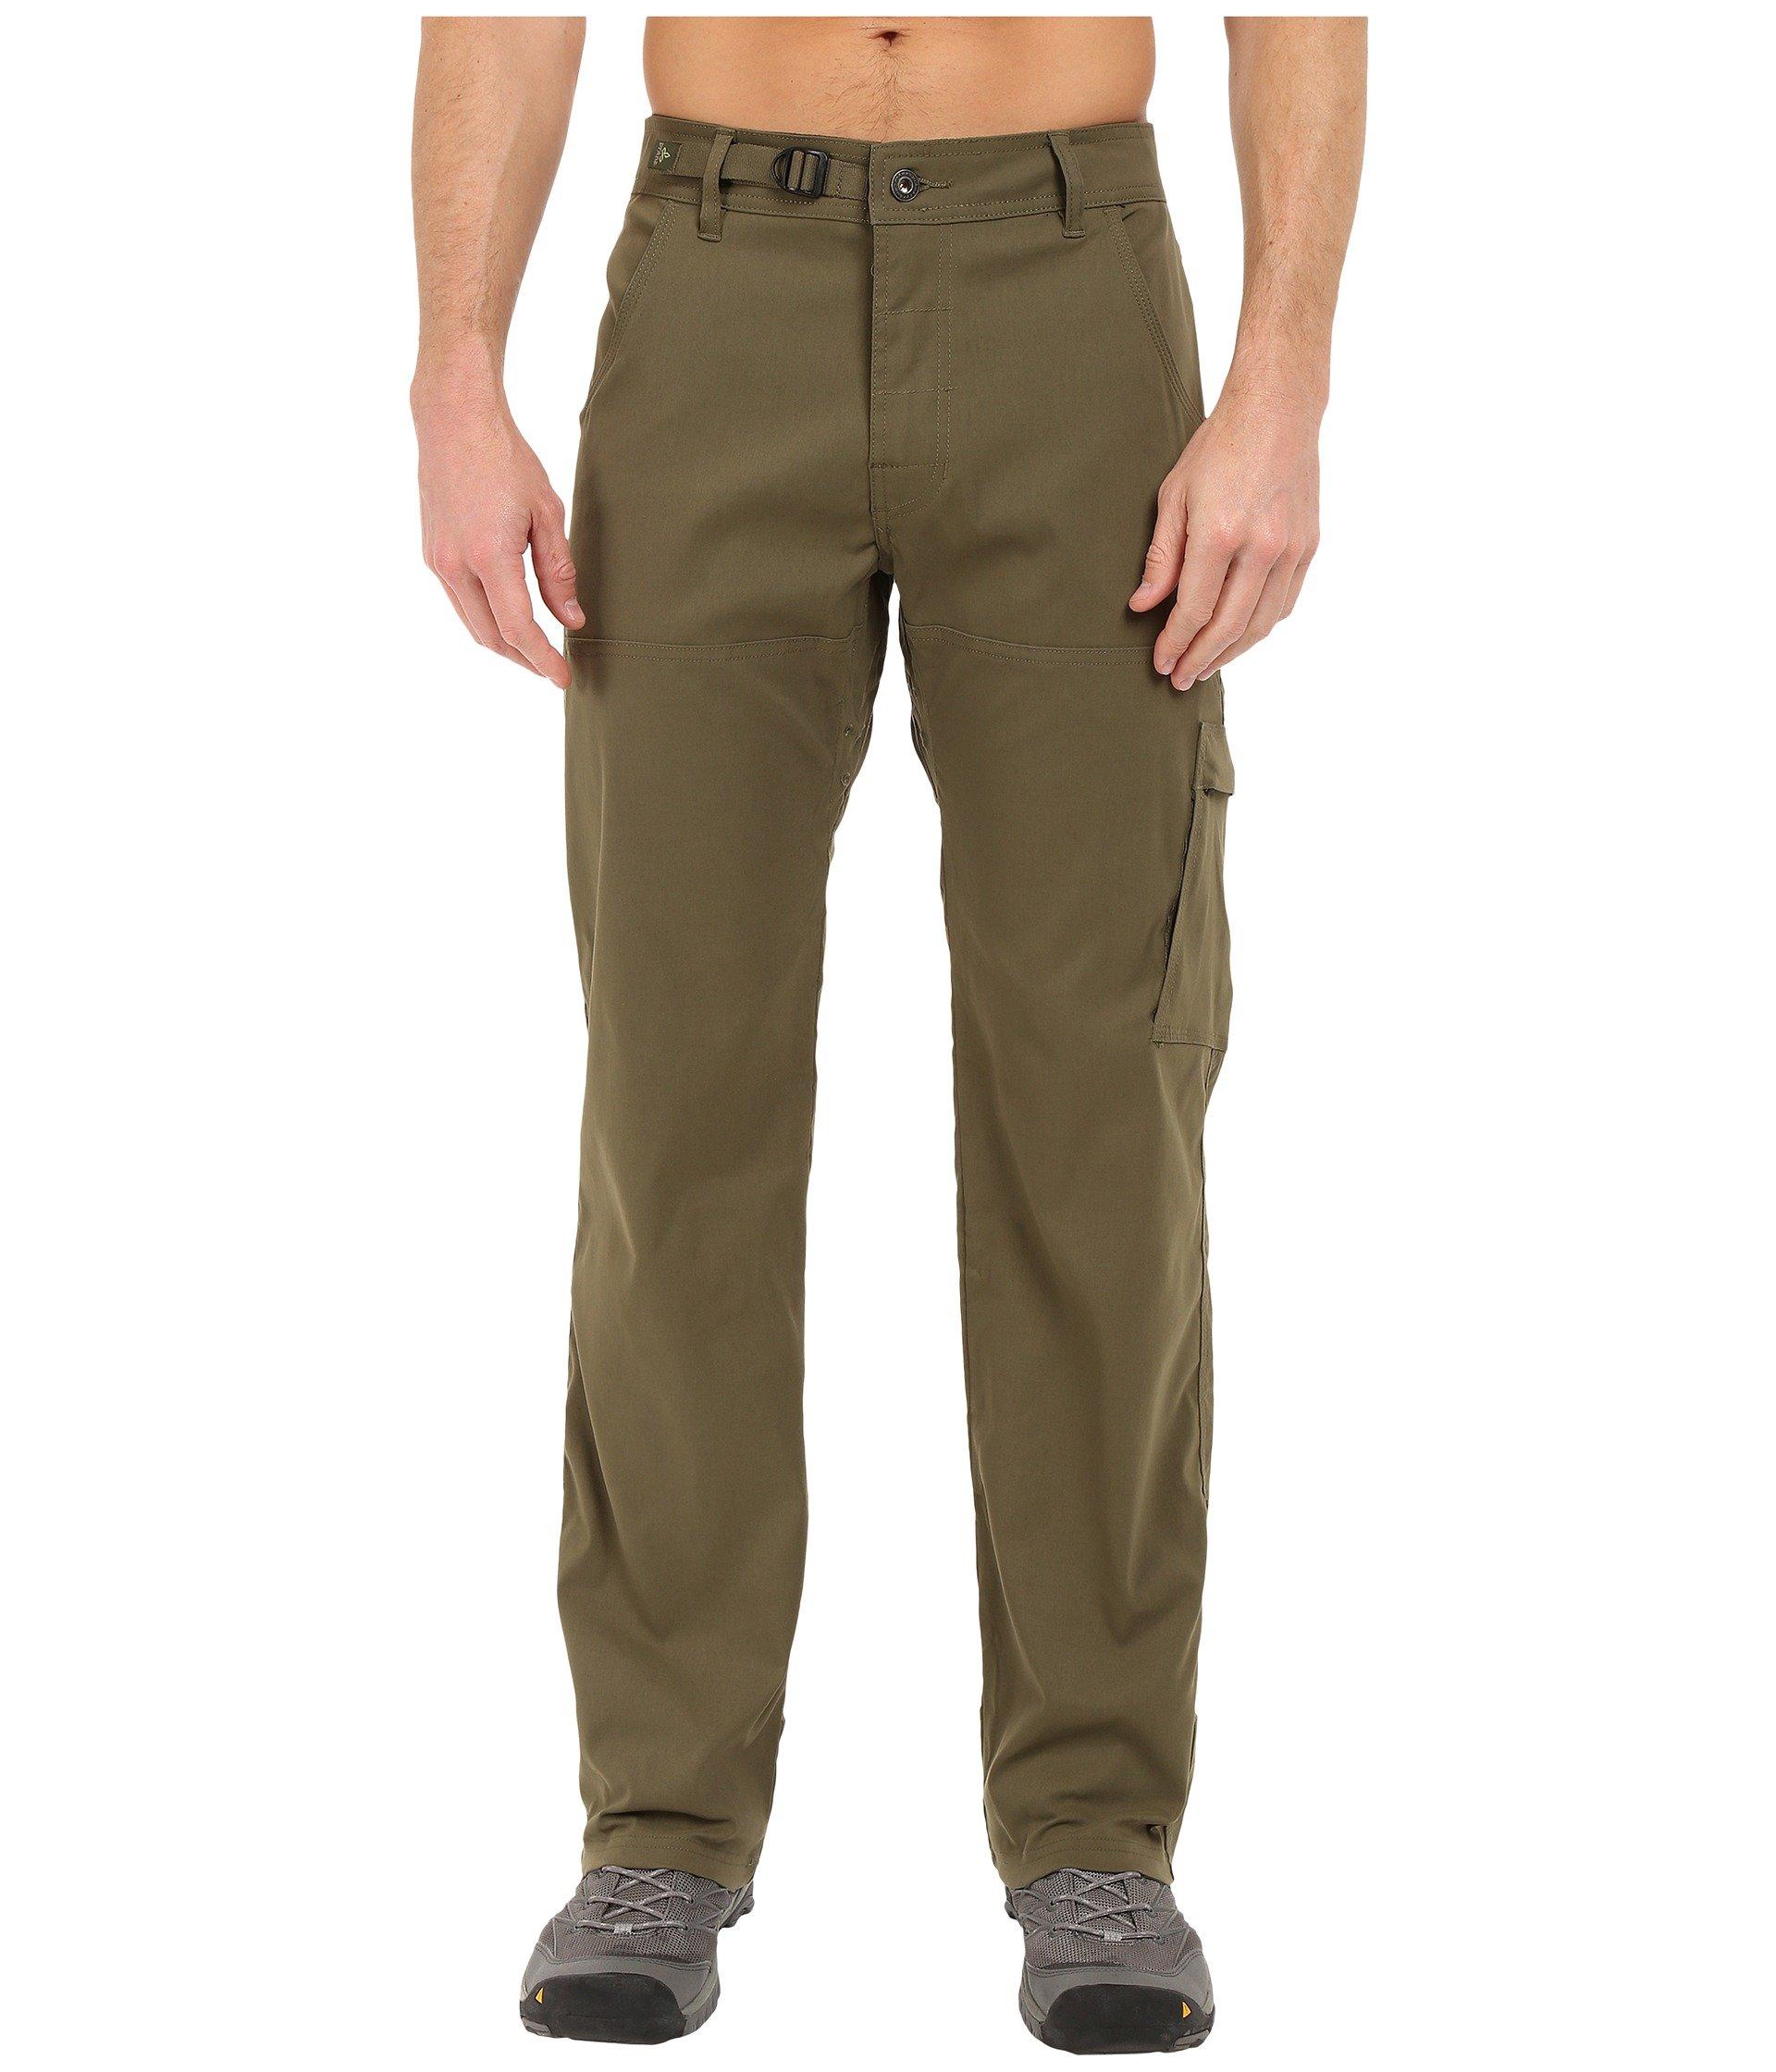 Prana Synthetic Stretch Zion Pant in Cargo Green (Green) for Men - Lyst